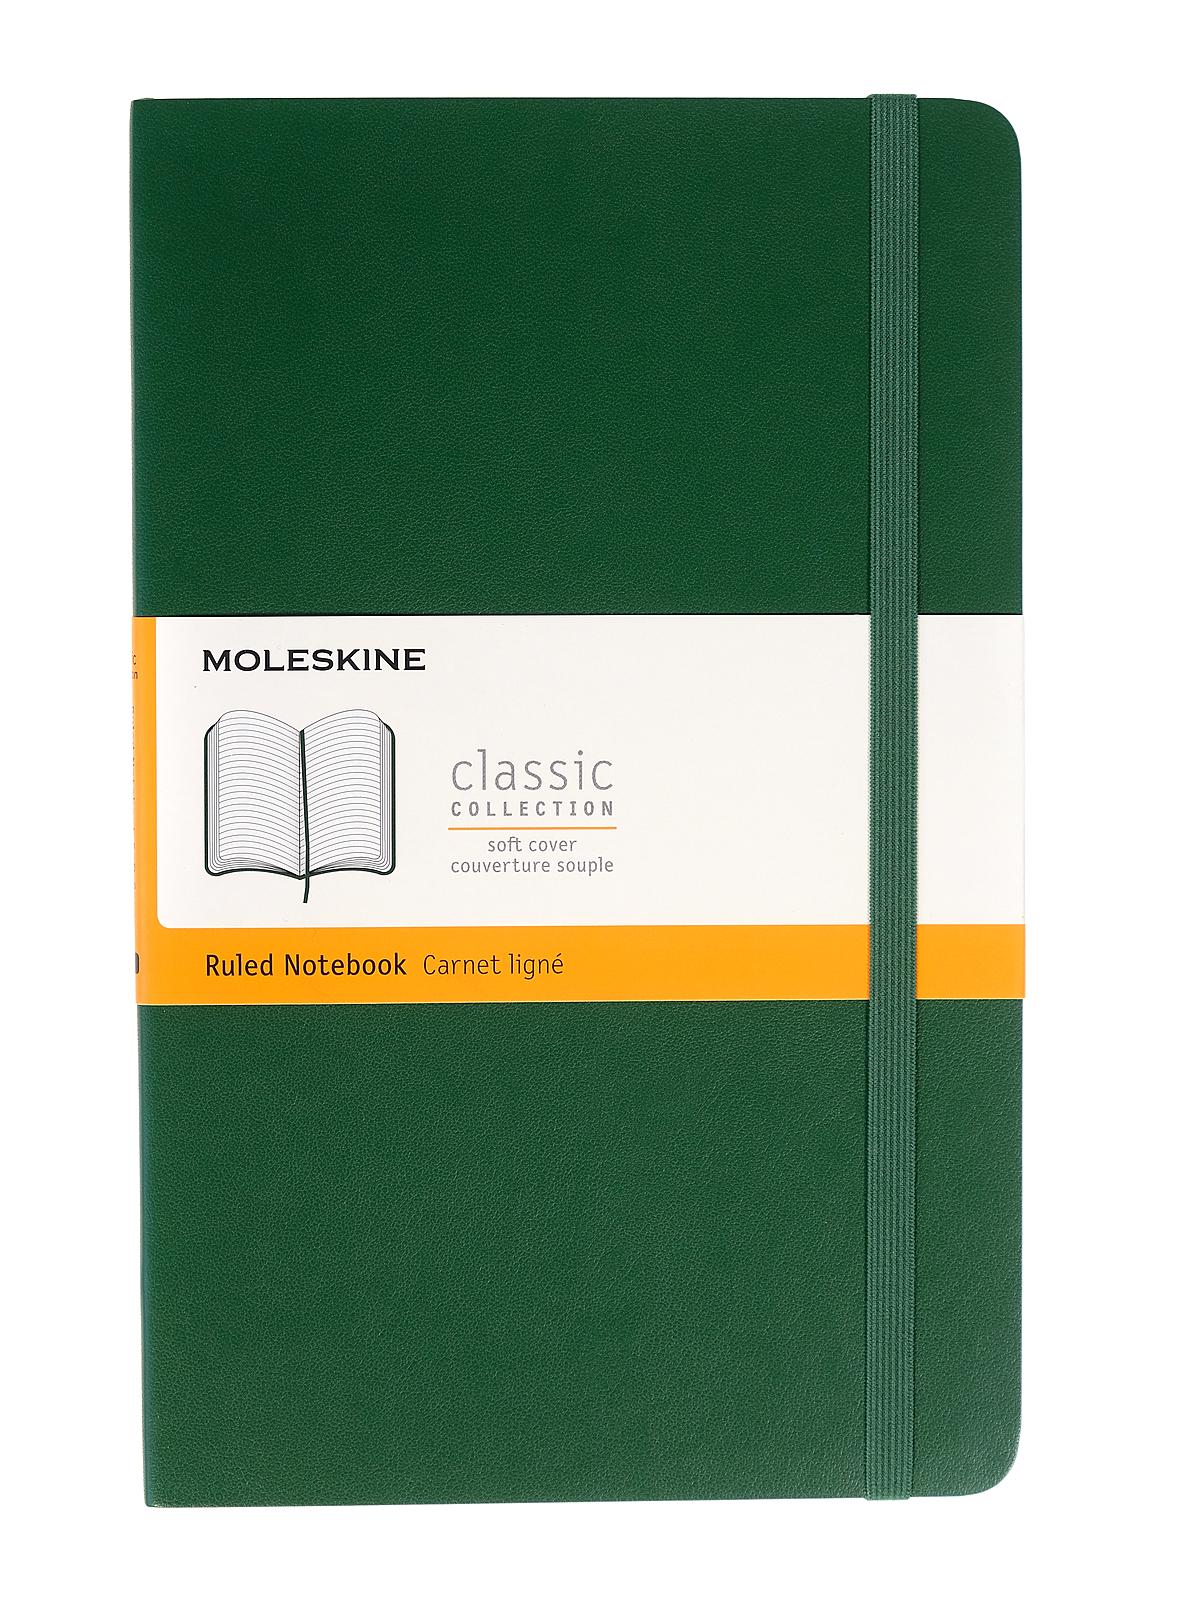 Classic Soft Cover Notebooks Myrtle Green 5 In. X 8 1 4 In. 192 Pages, Lined